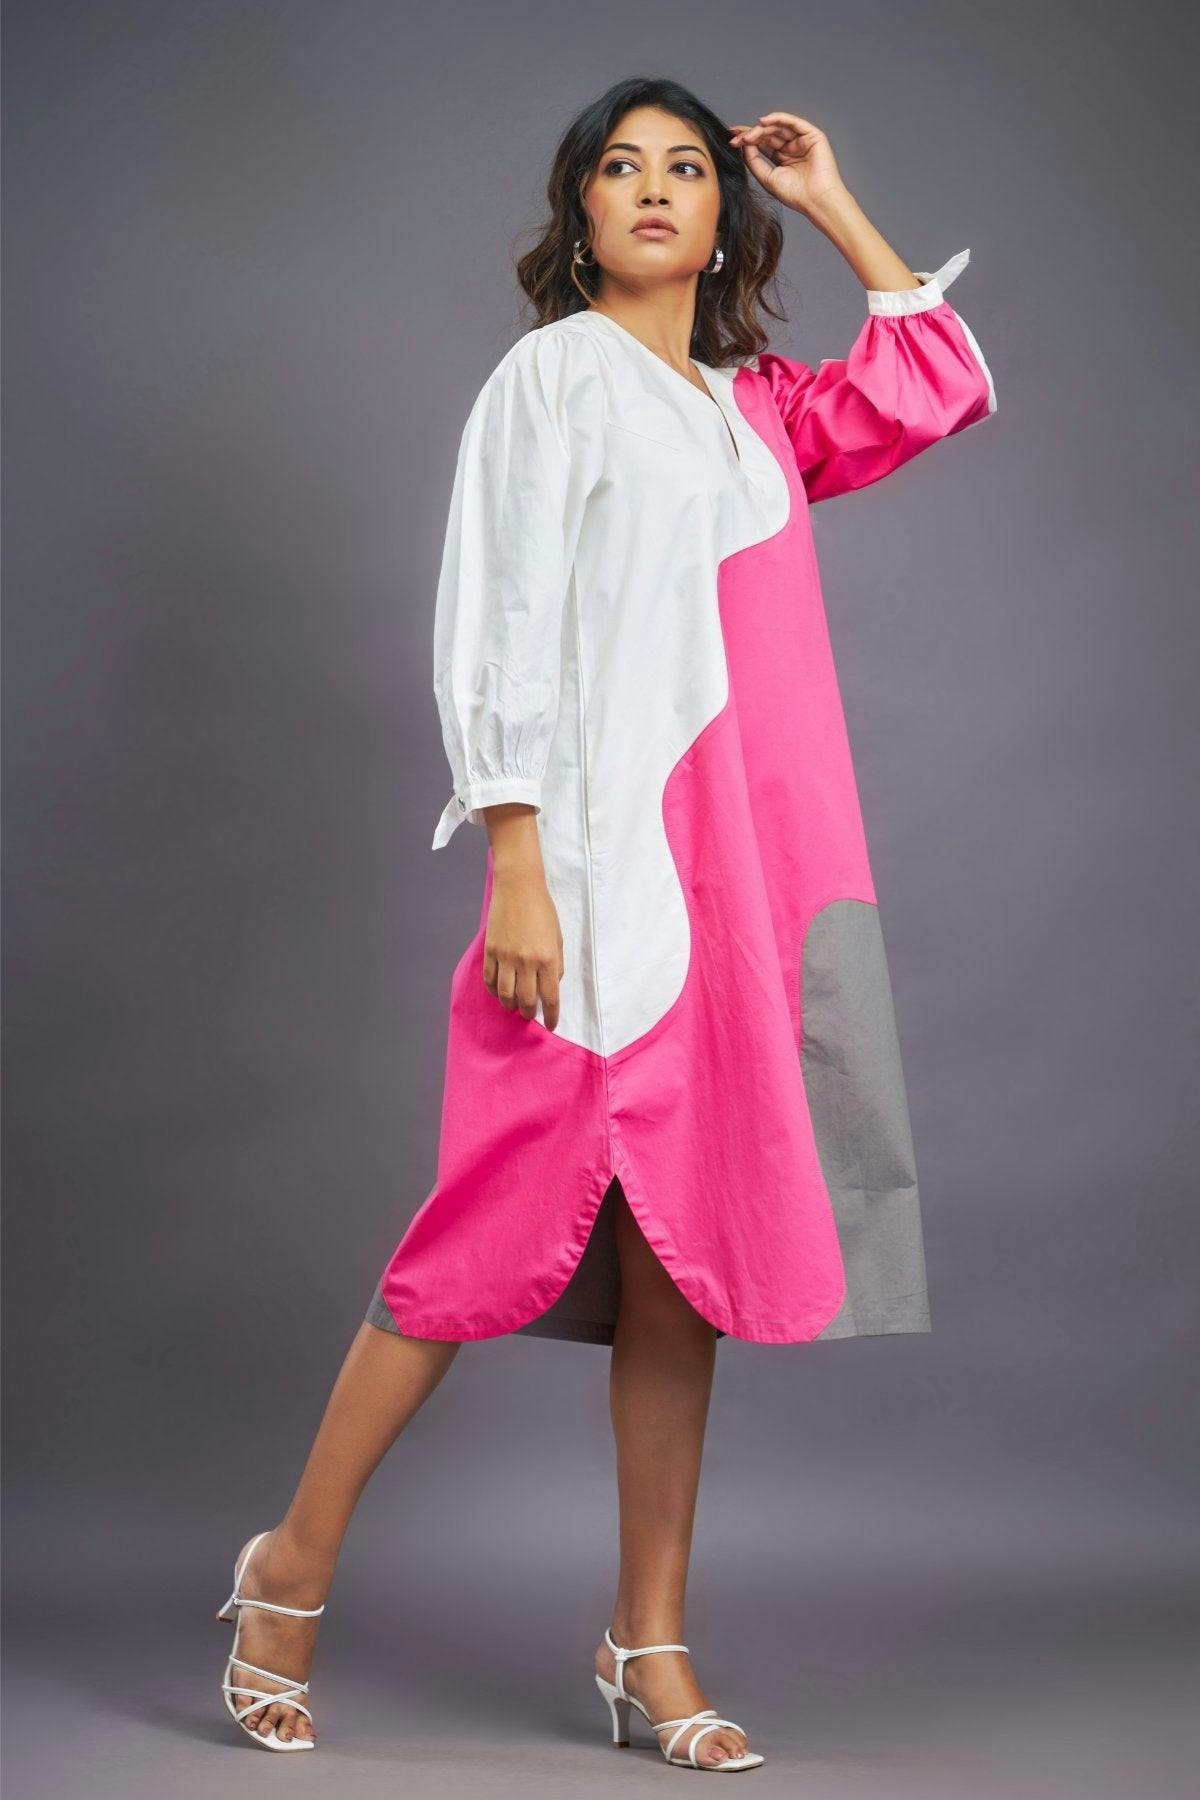 Thumbnail preview #3 for BB-1105-PG - White Pink Oversized Dress